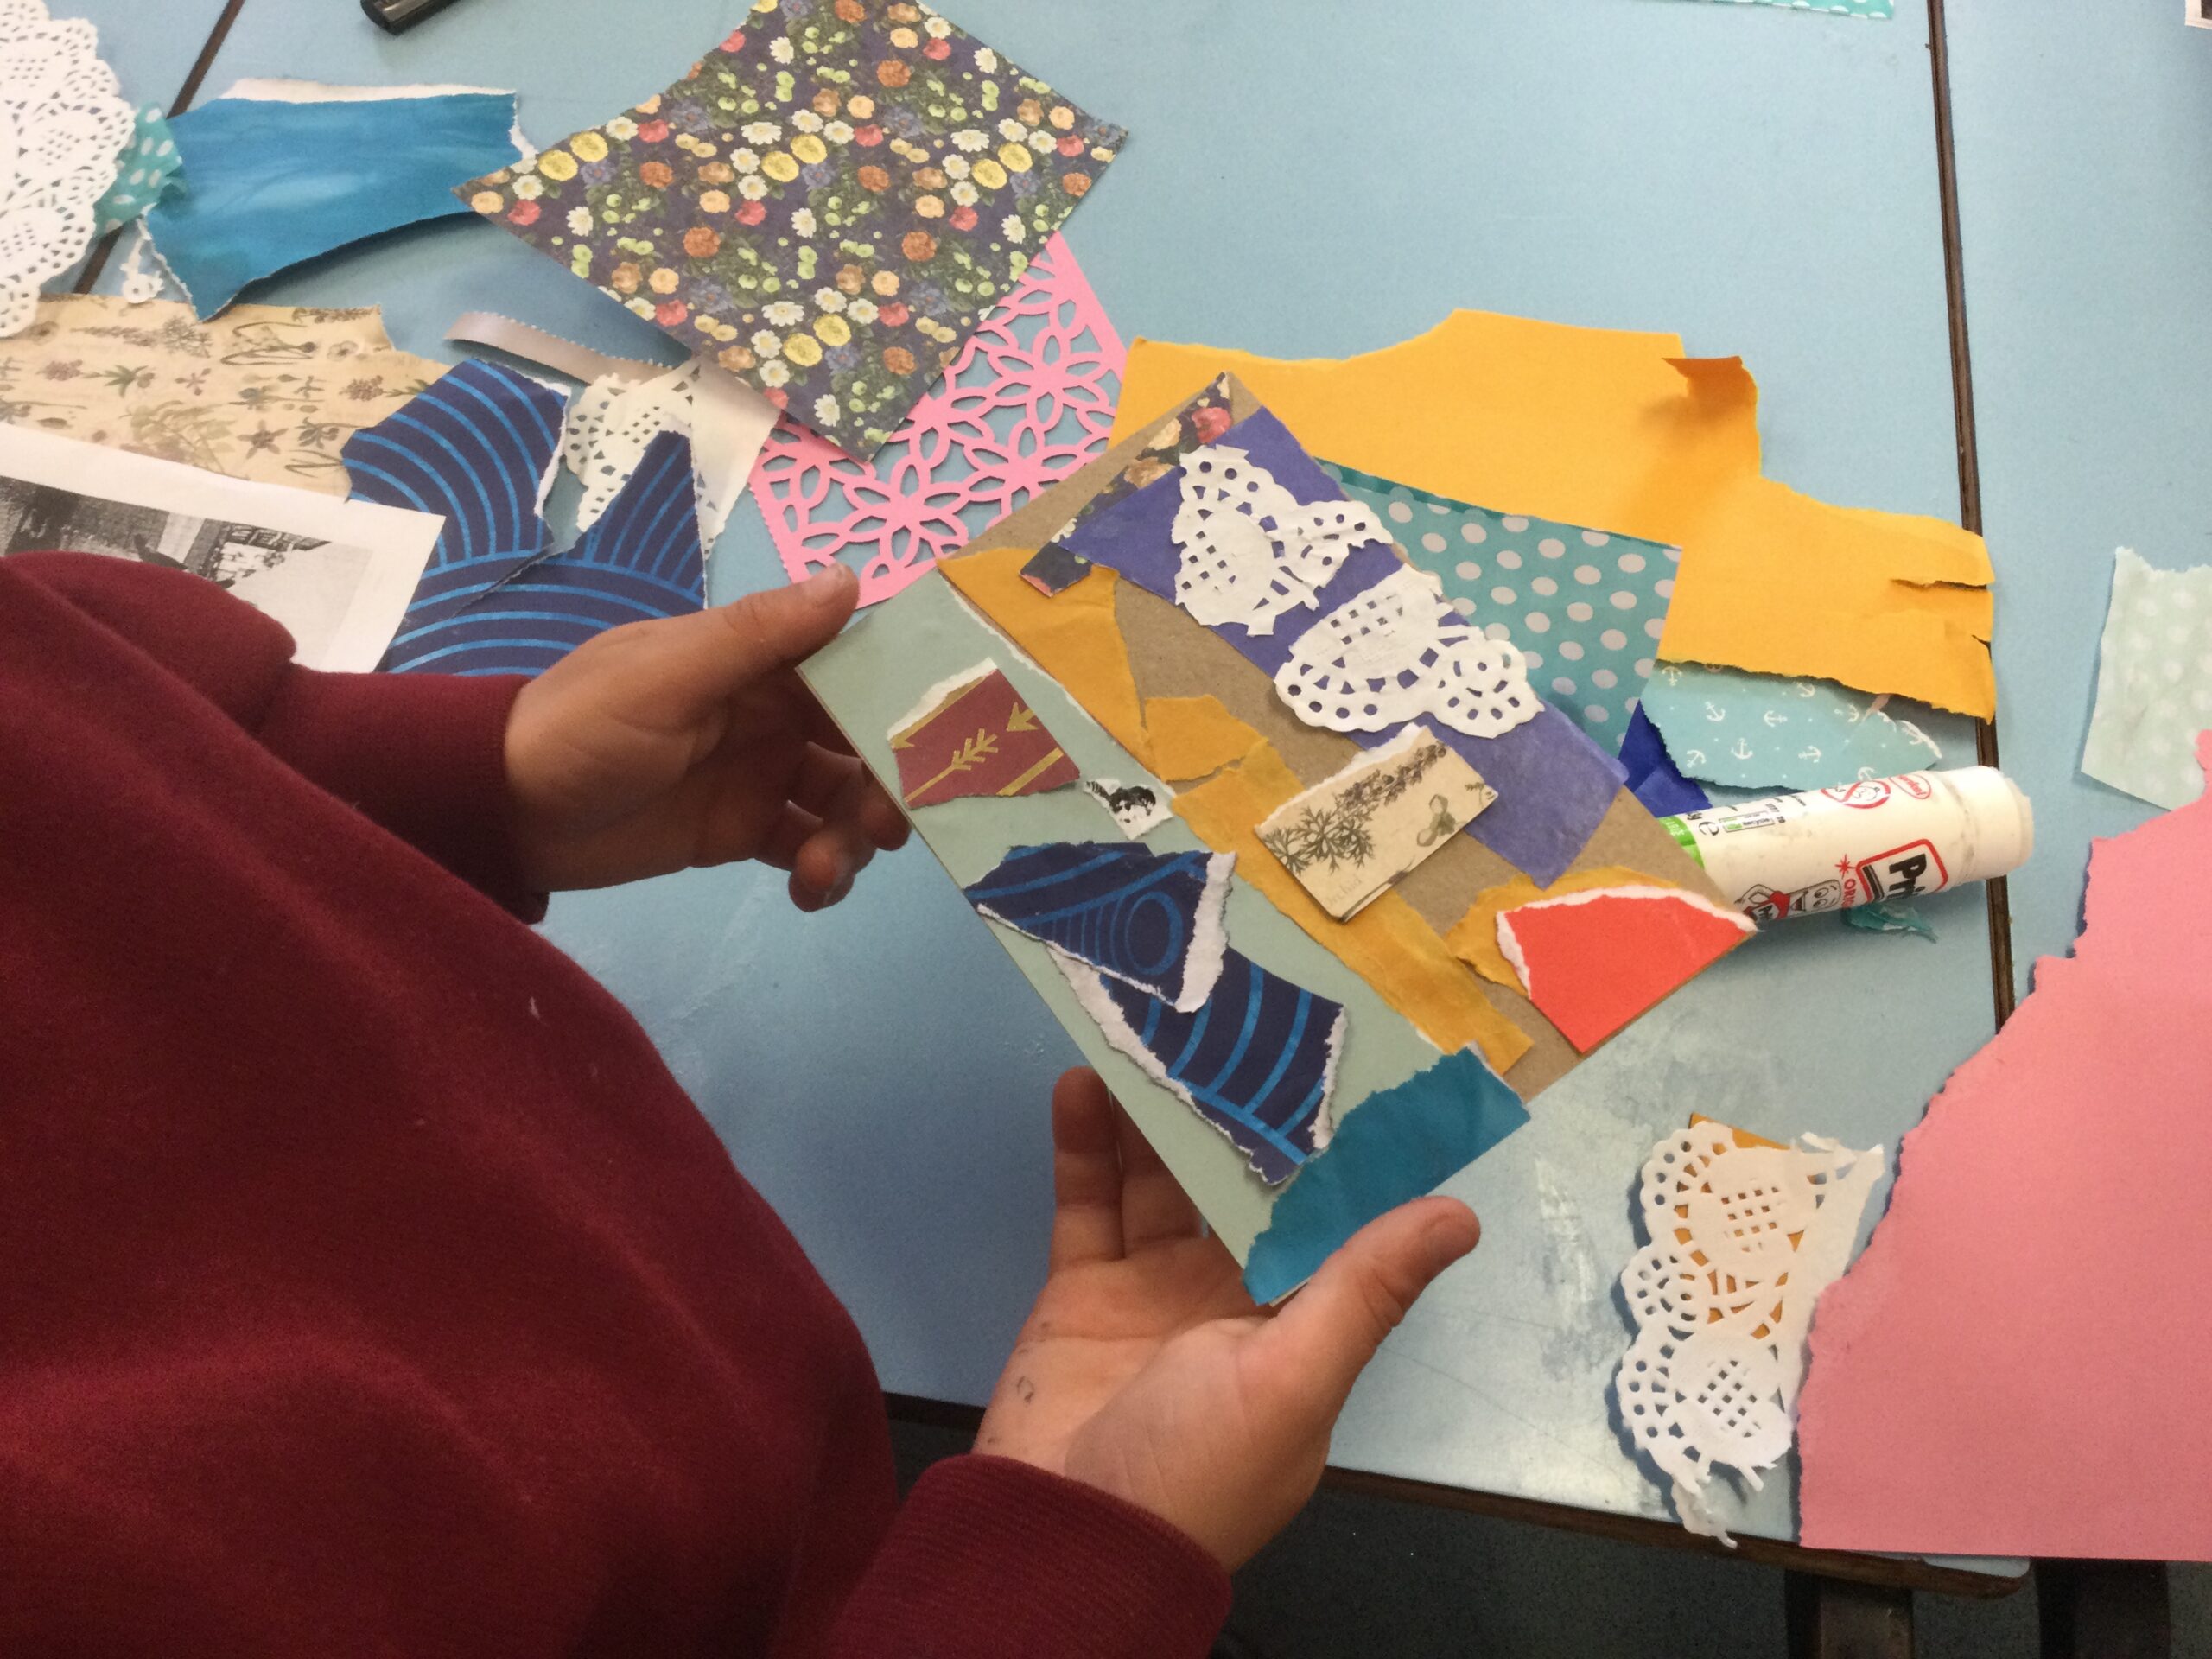 A child's hands hold a postcard, decorated with snippets of blue, yellow and pink paper and white doily. The child is obviously standing by a school table, on which are piles of decorative papers of all shapes and sizes and a glue stick